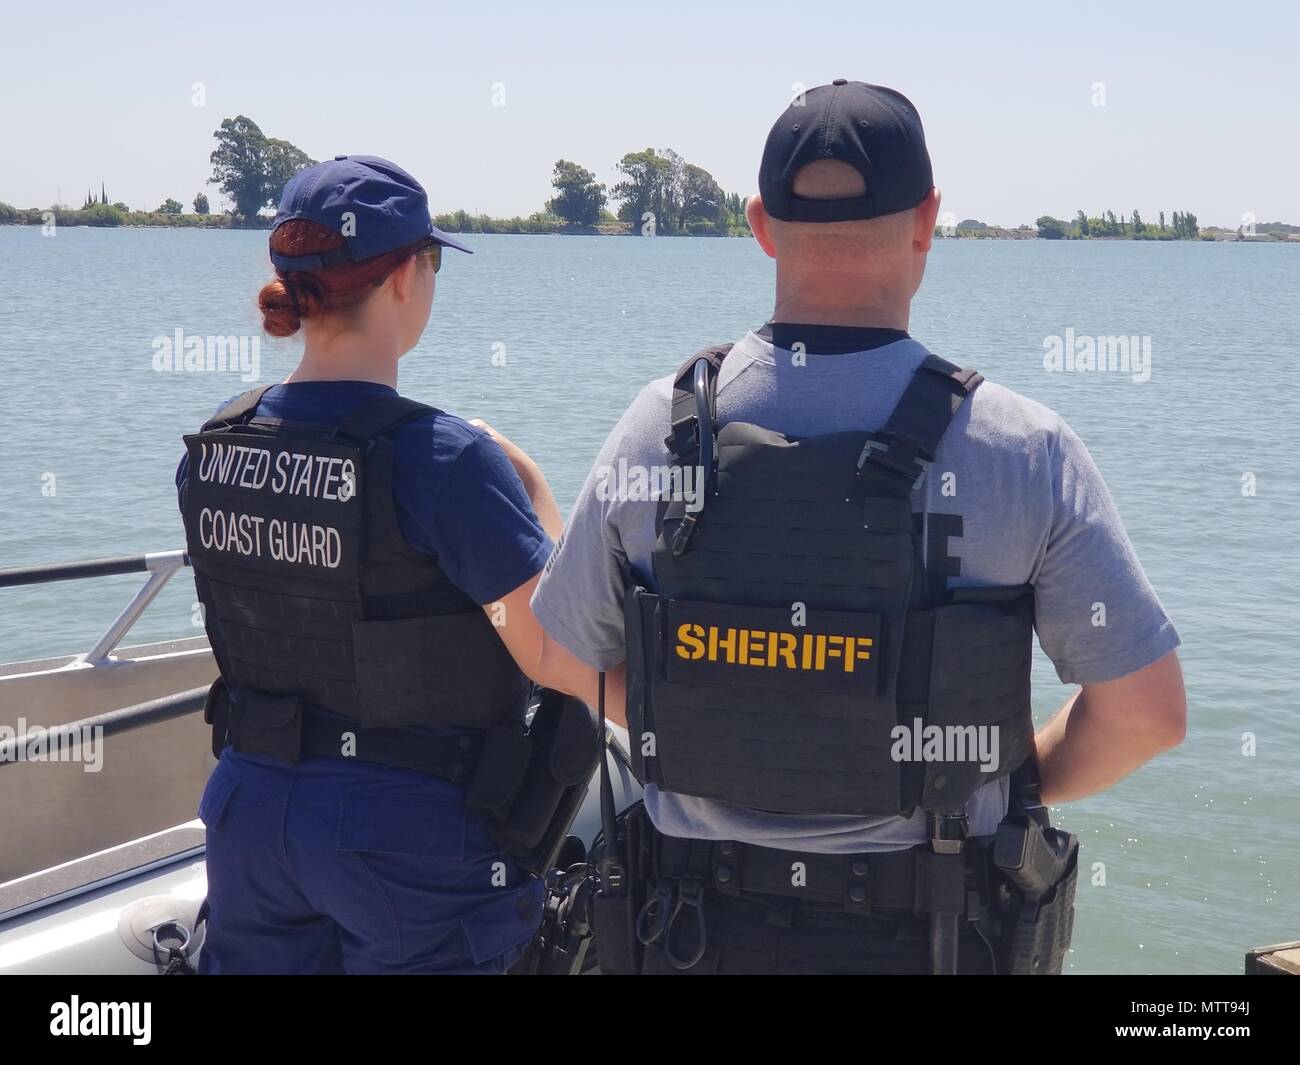 Petty Officer 3rd Class Iris Bahr of Coast Guard Station Rio Vista and Mike Keegan of the Sacramento County Sheriff’s Marine Unit watch over the Delta Waterway in Rio Vista, California, May 22, 2018 during National Safe Boating Week.  The Coast Guard works closely with local law enforcement agencies to collaboratively patrol waterways and promote boating safety.  (Coast Guard photo by Petty Officer 2nd Class Paul Krug) Stock Photo